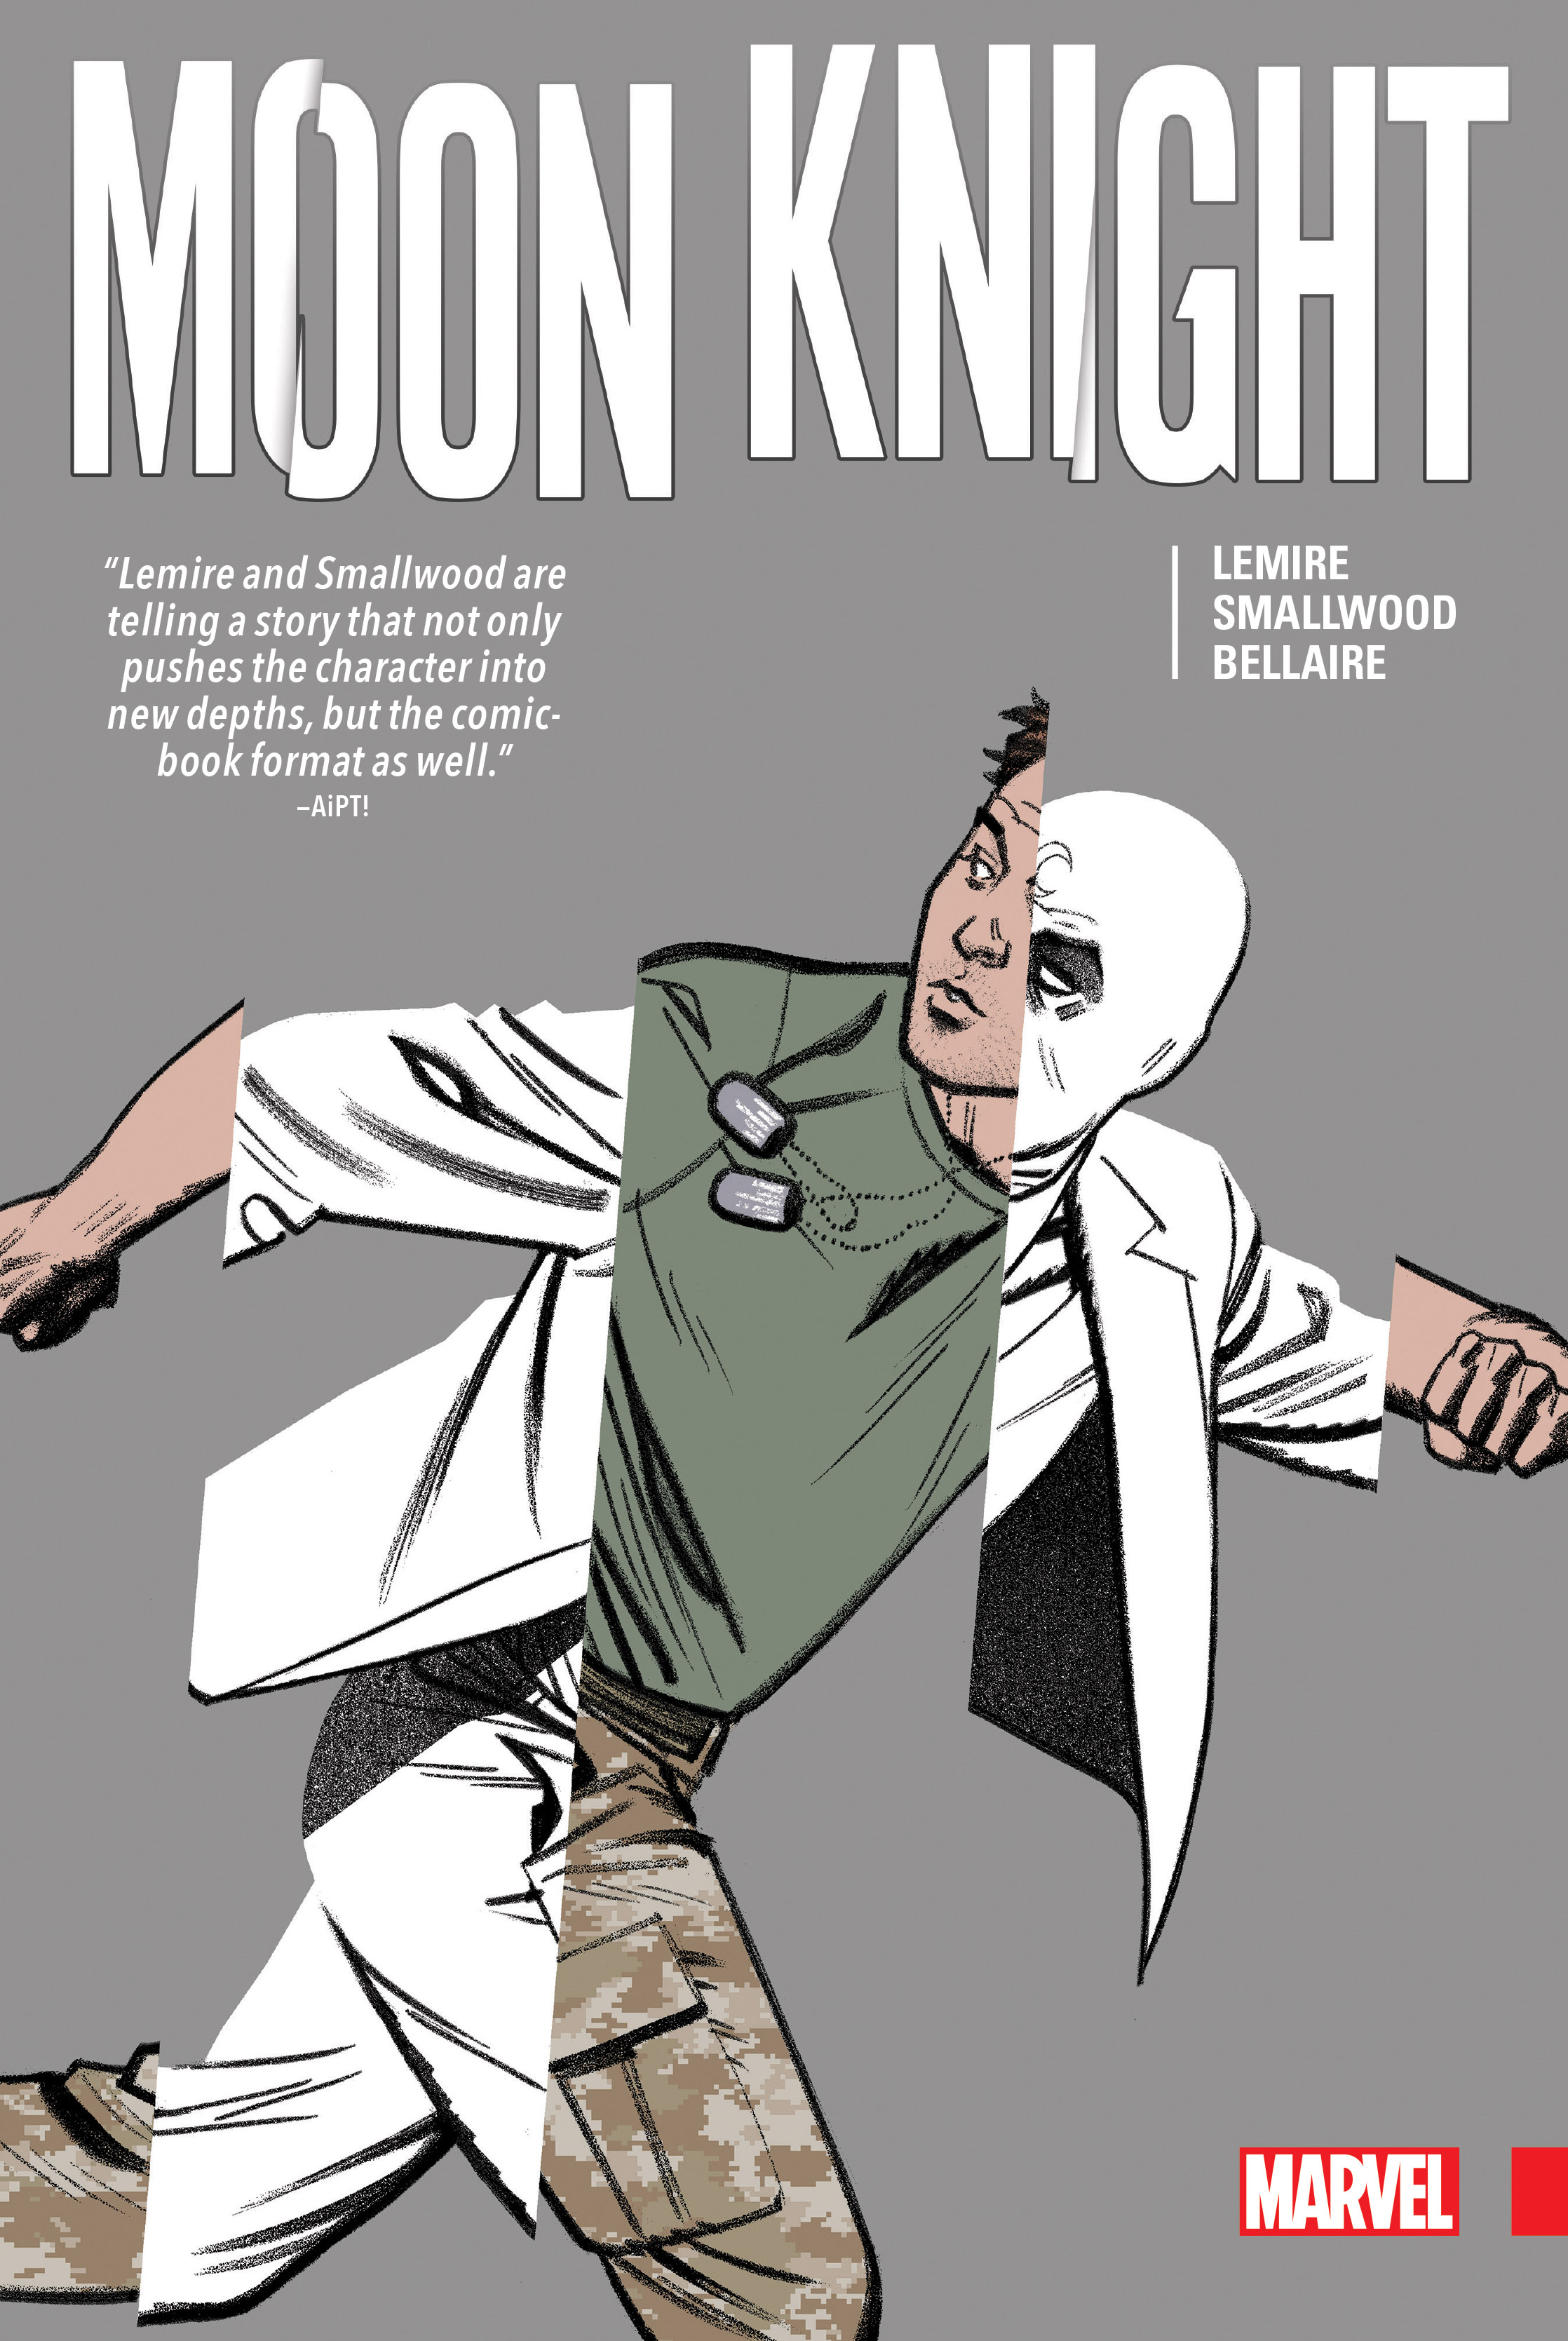 Moon Knight by Lemire & Smallwood (Hardcover)